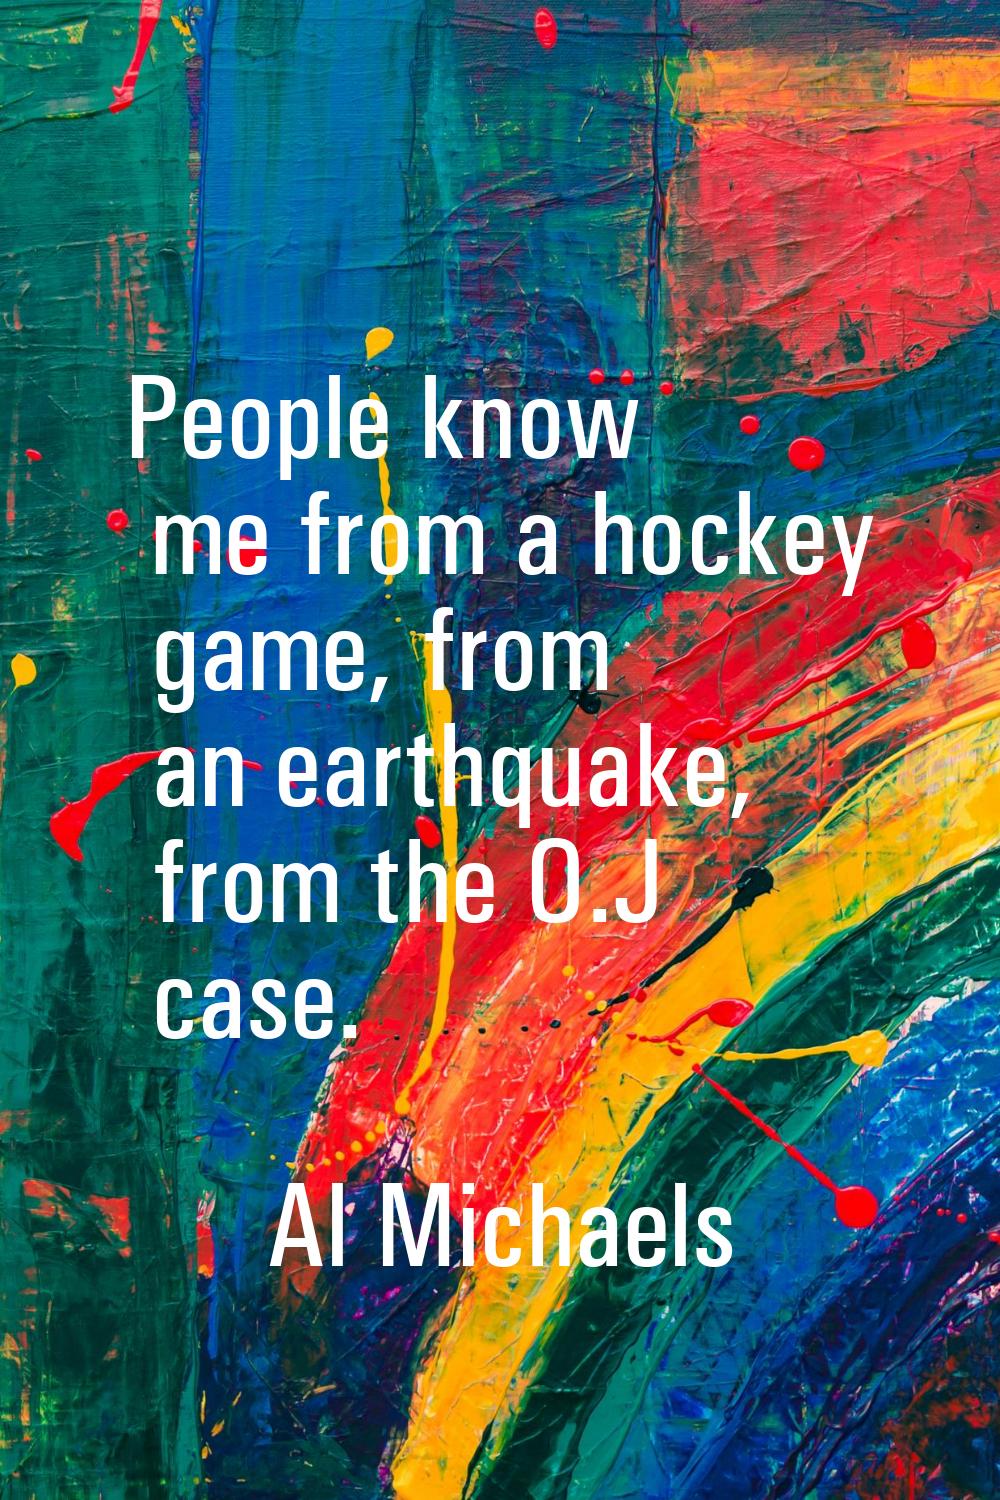 People know me from a hockey game, from an earthquake, from the O.J case.